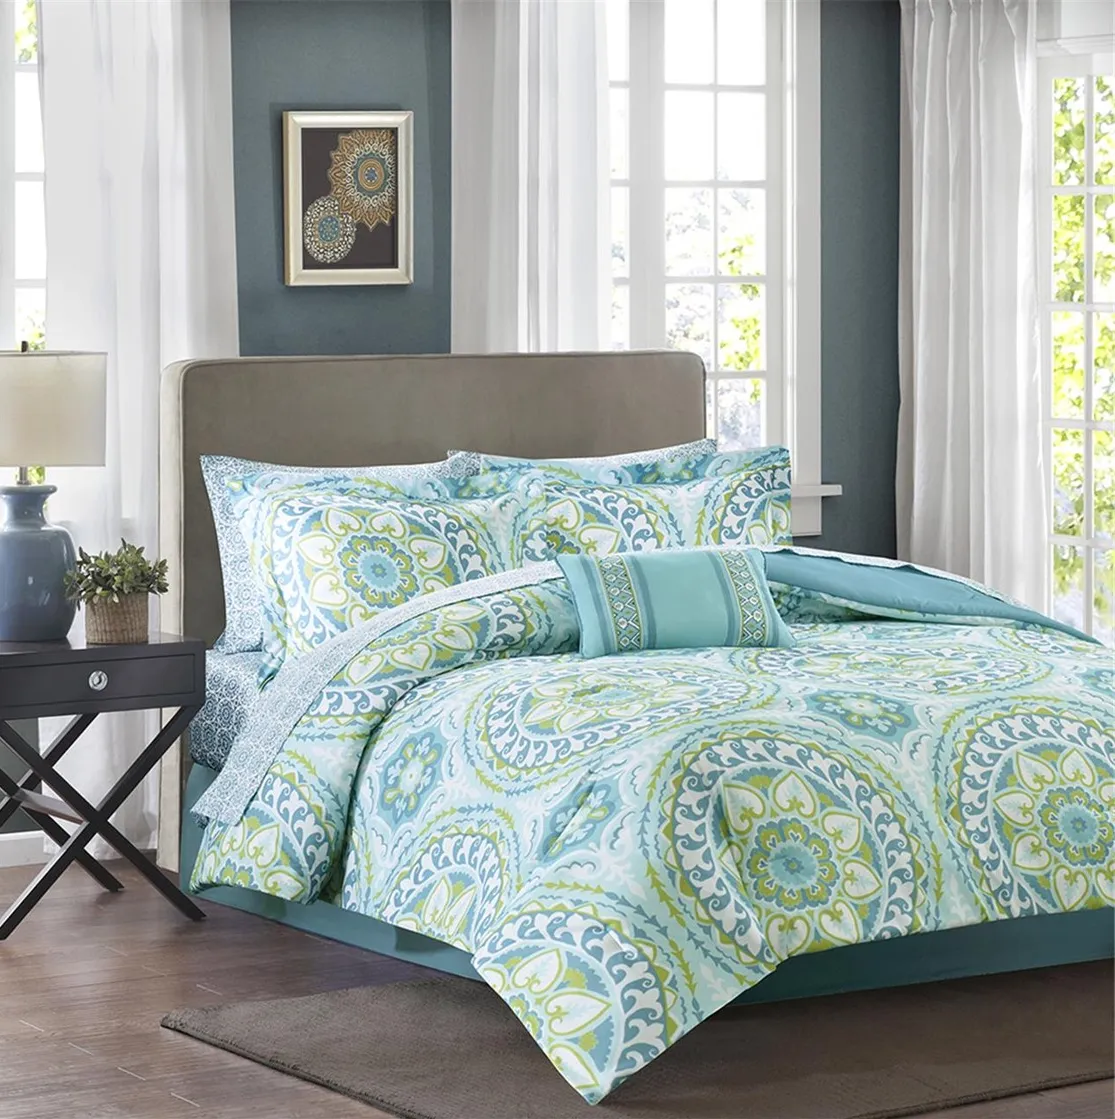 Olliix by Madison Park Essentials Serenity Aqua Full Complete Comforter and Cotton Sheet Set